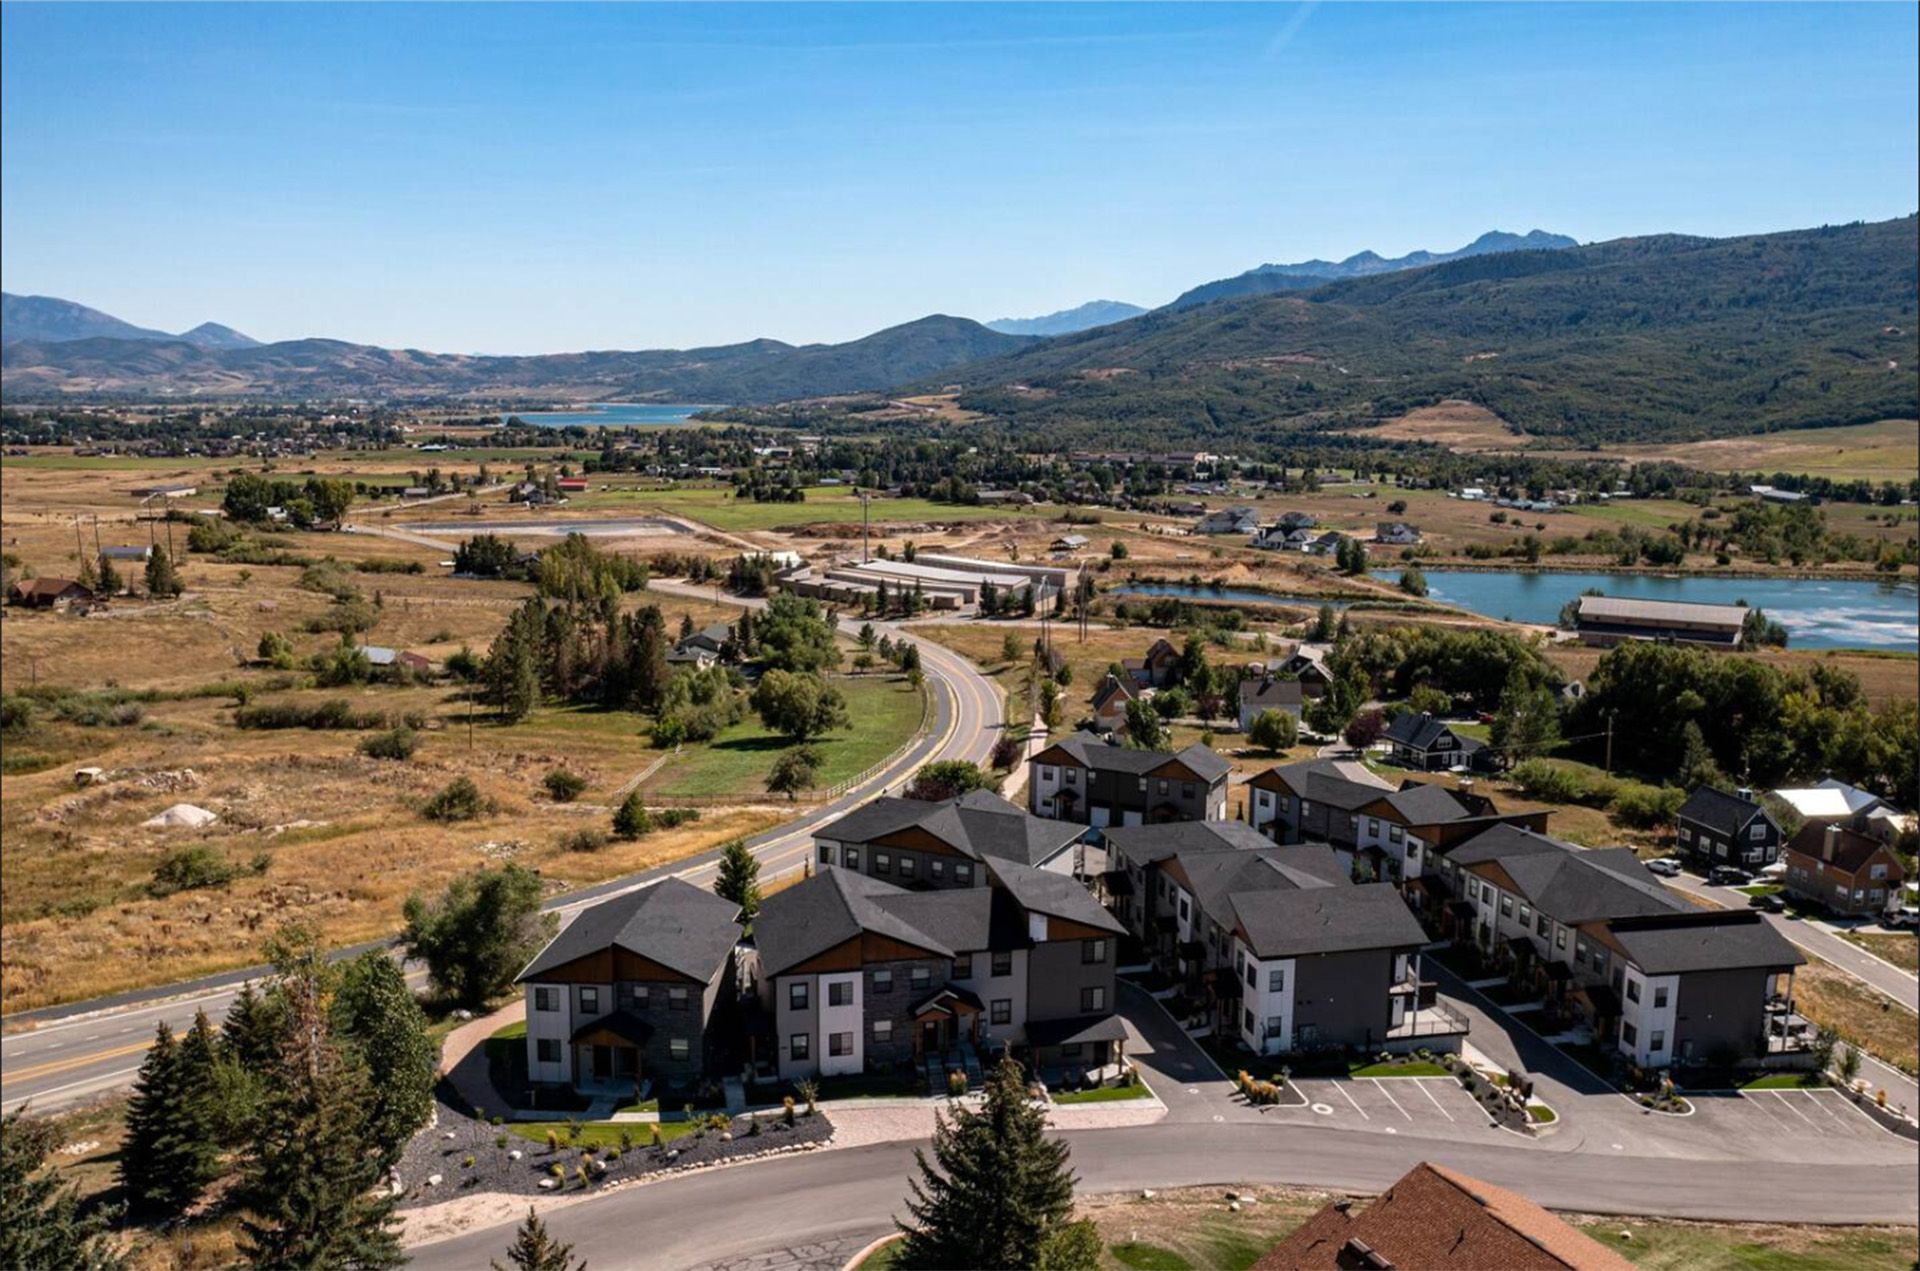 An aerial view of the Peaks development area with mountains in the background.